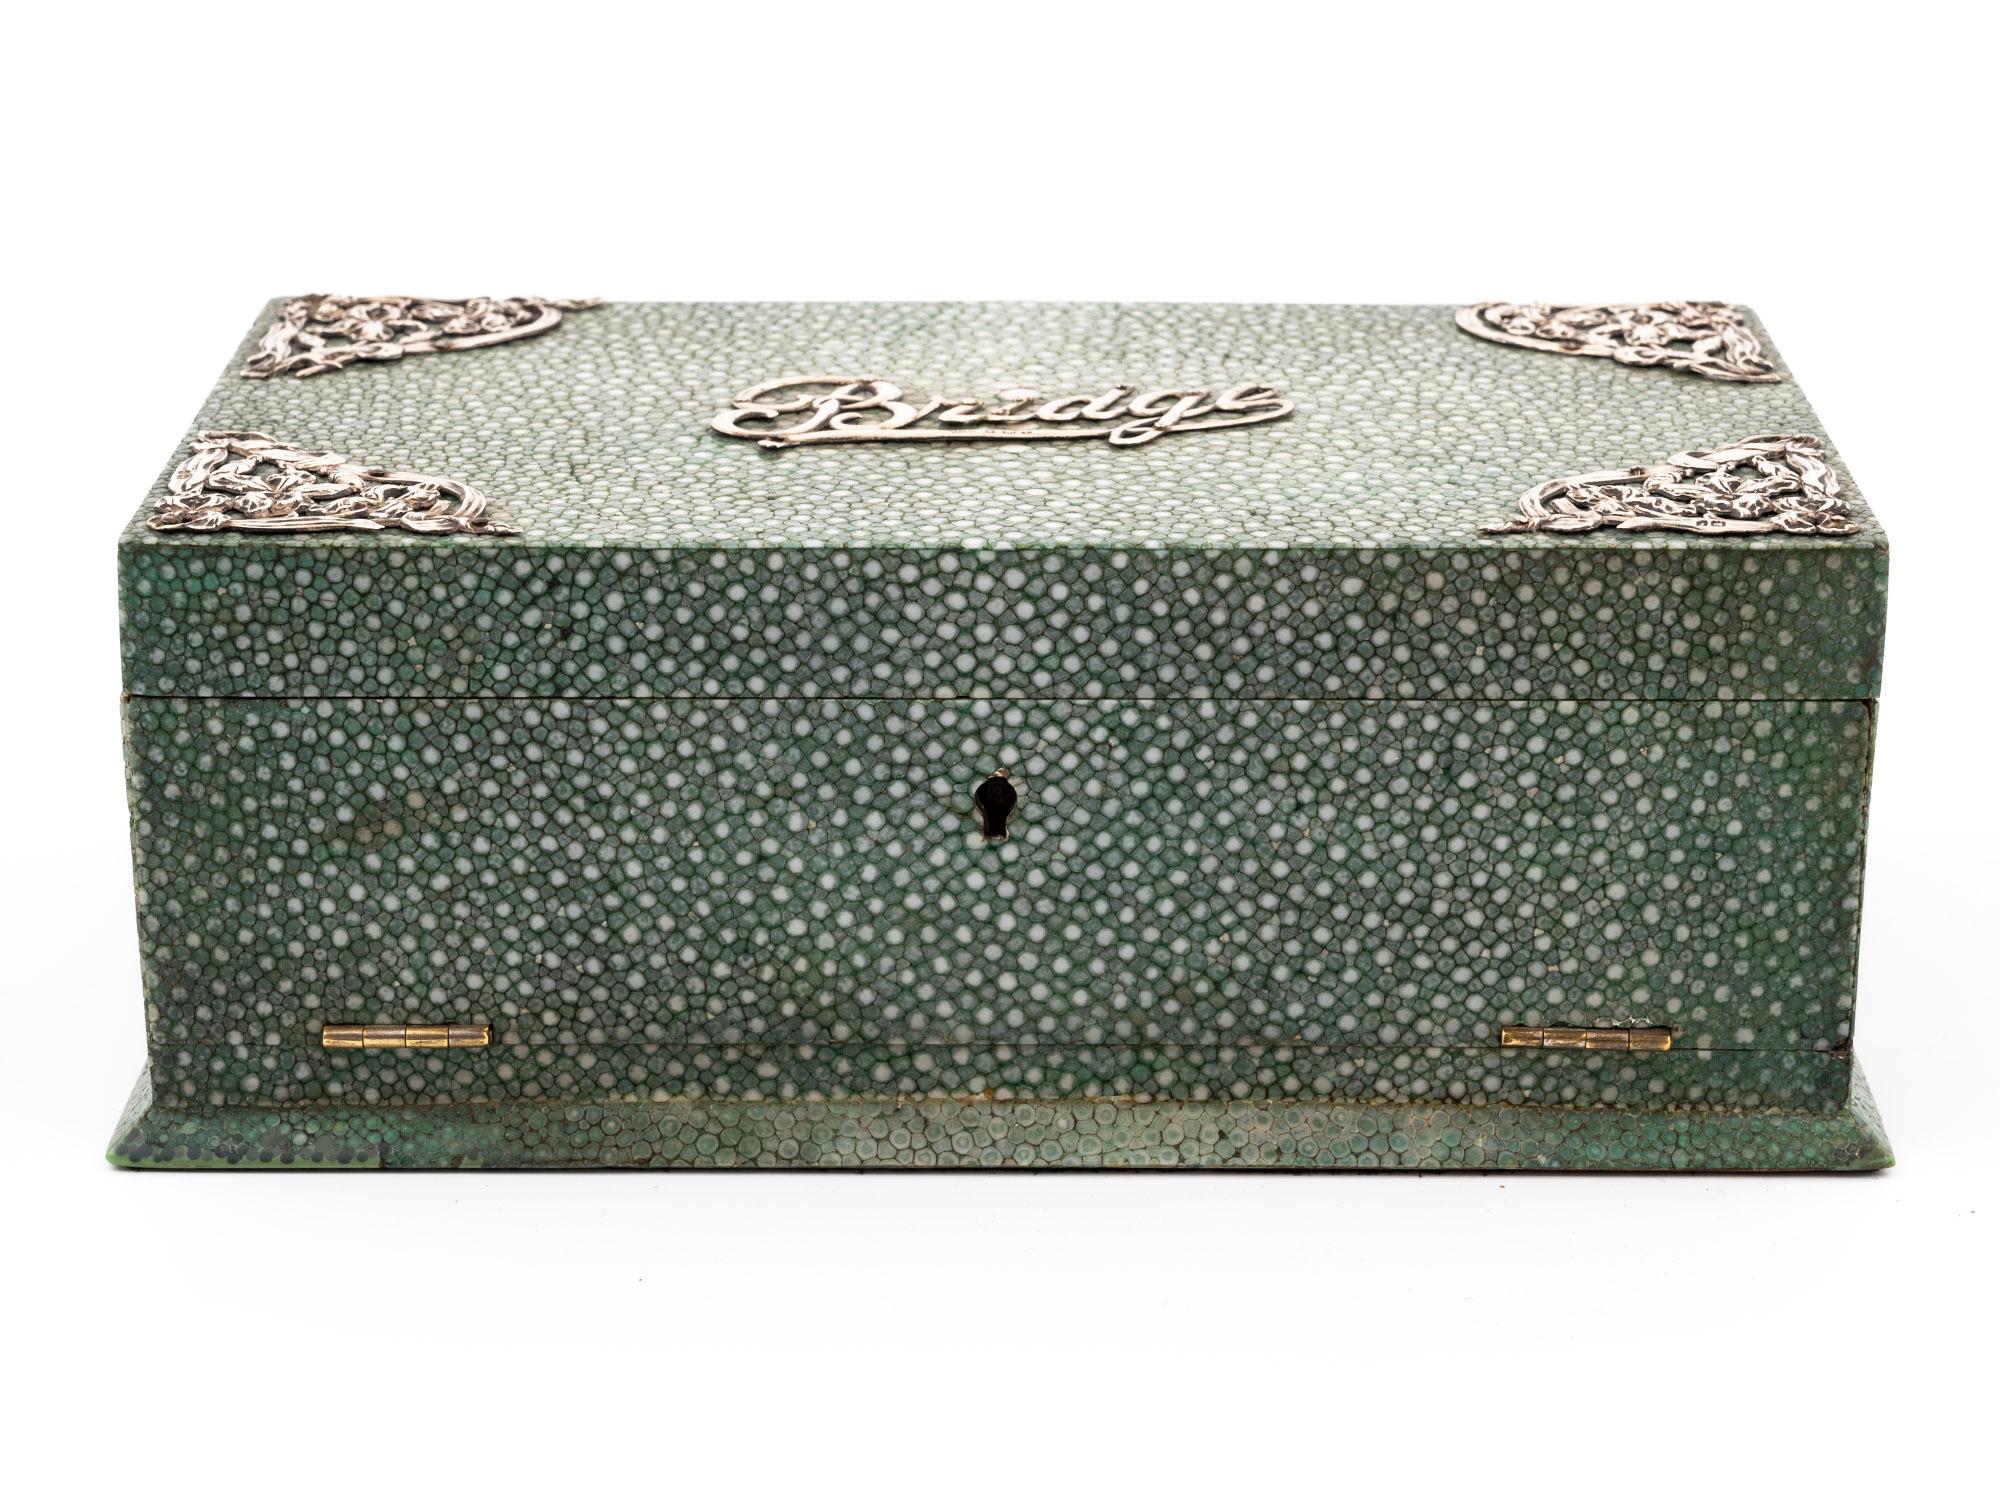 With Bridge Game Contents 

From our Boxes collection, we are delighted to offer this Green Stained Shareen Bridge Games Box. The box of rectangular shape seated upon a plinth base with a fully covered exterior in Green stained Shagreen. The Box